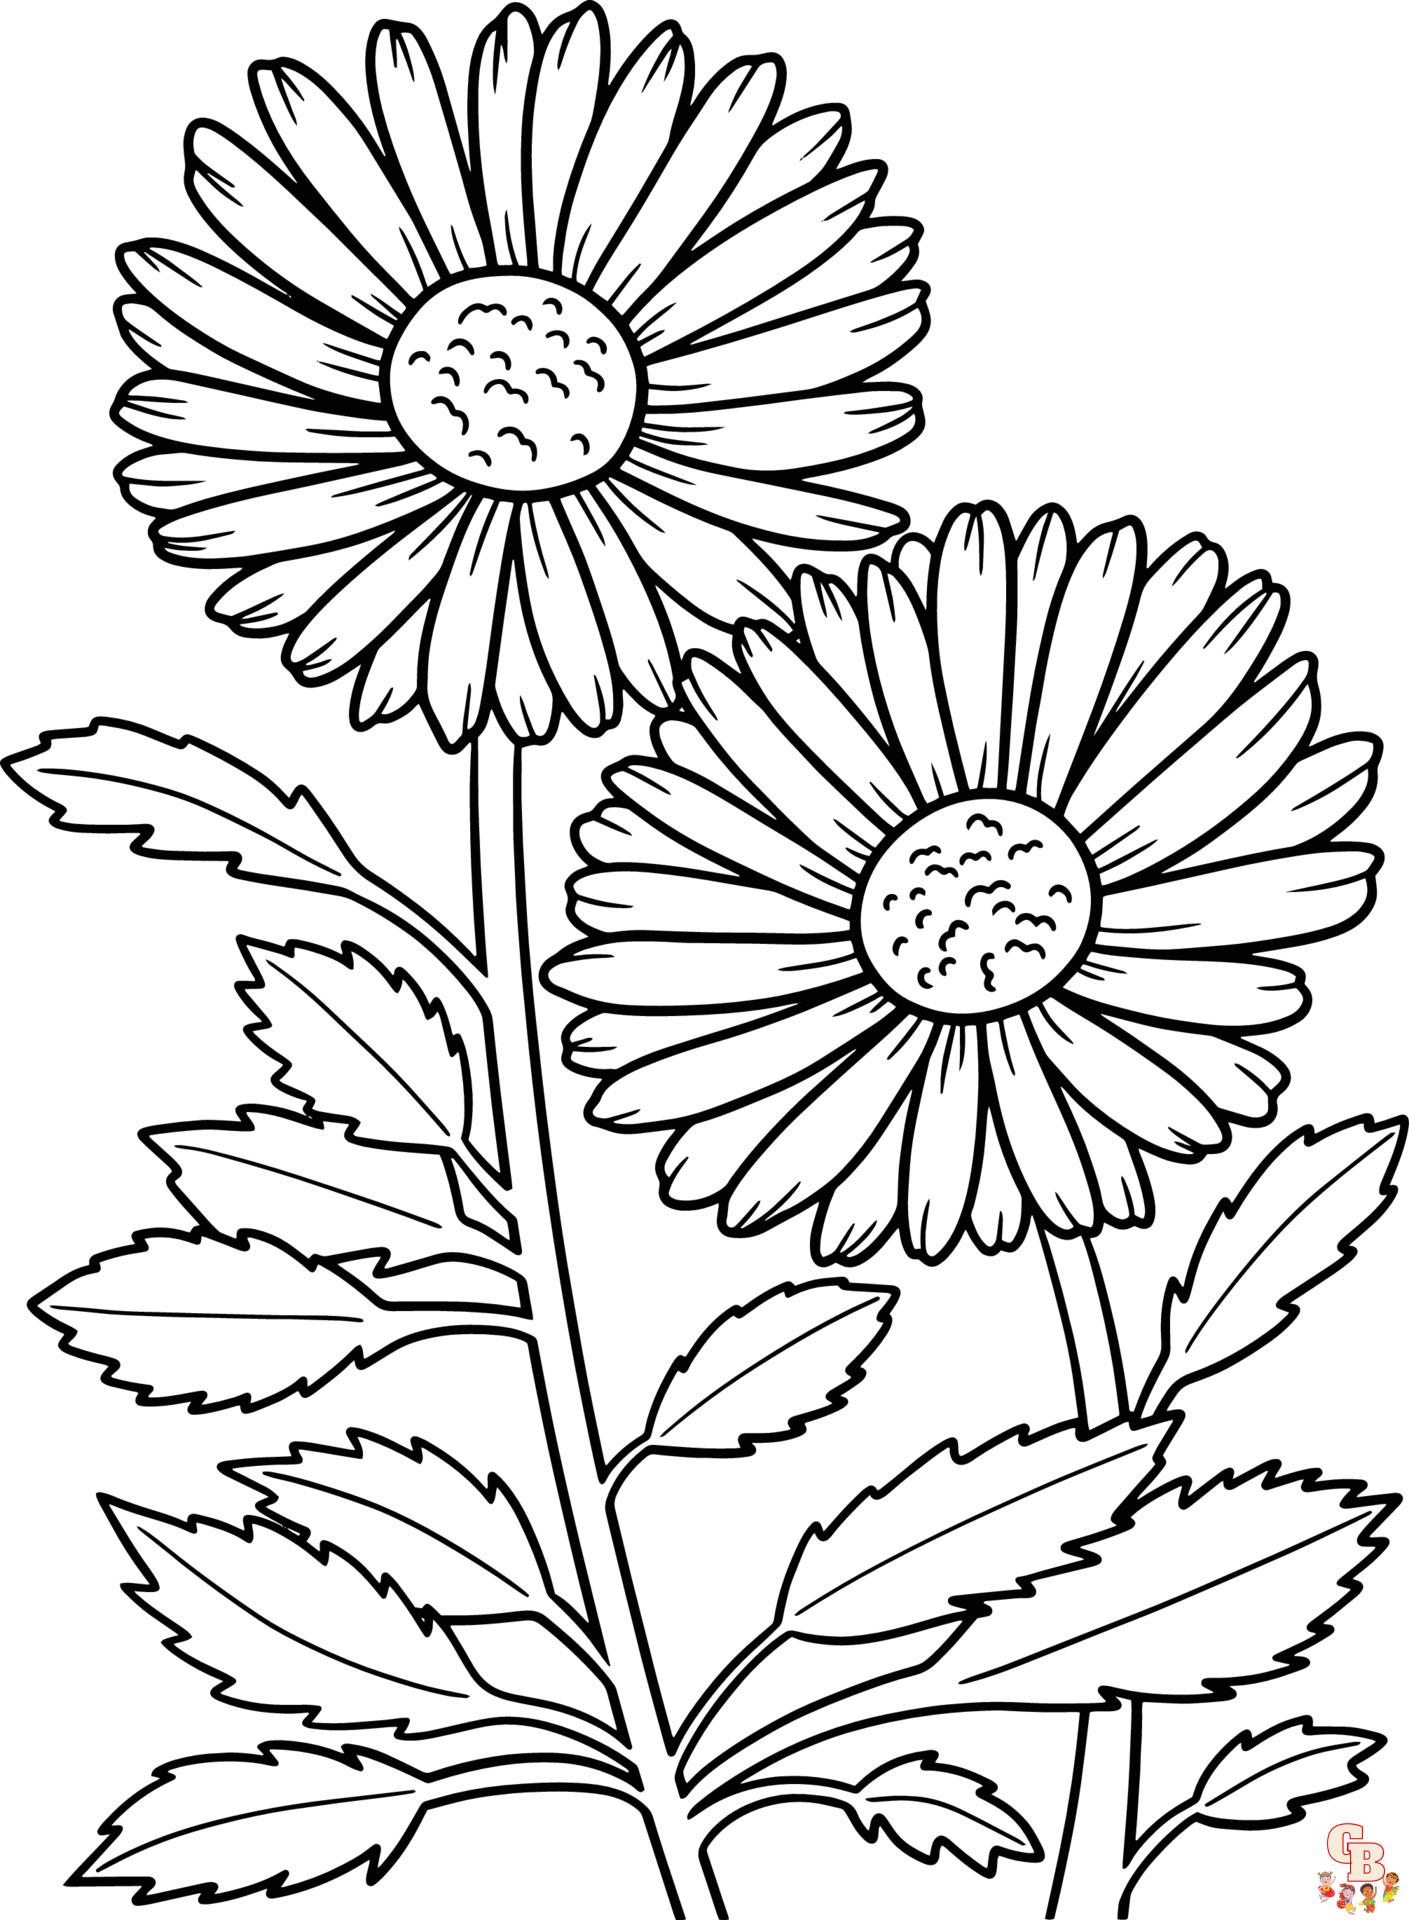 Daisy Coloring Pages 17